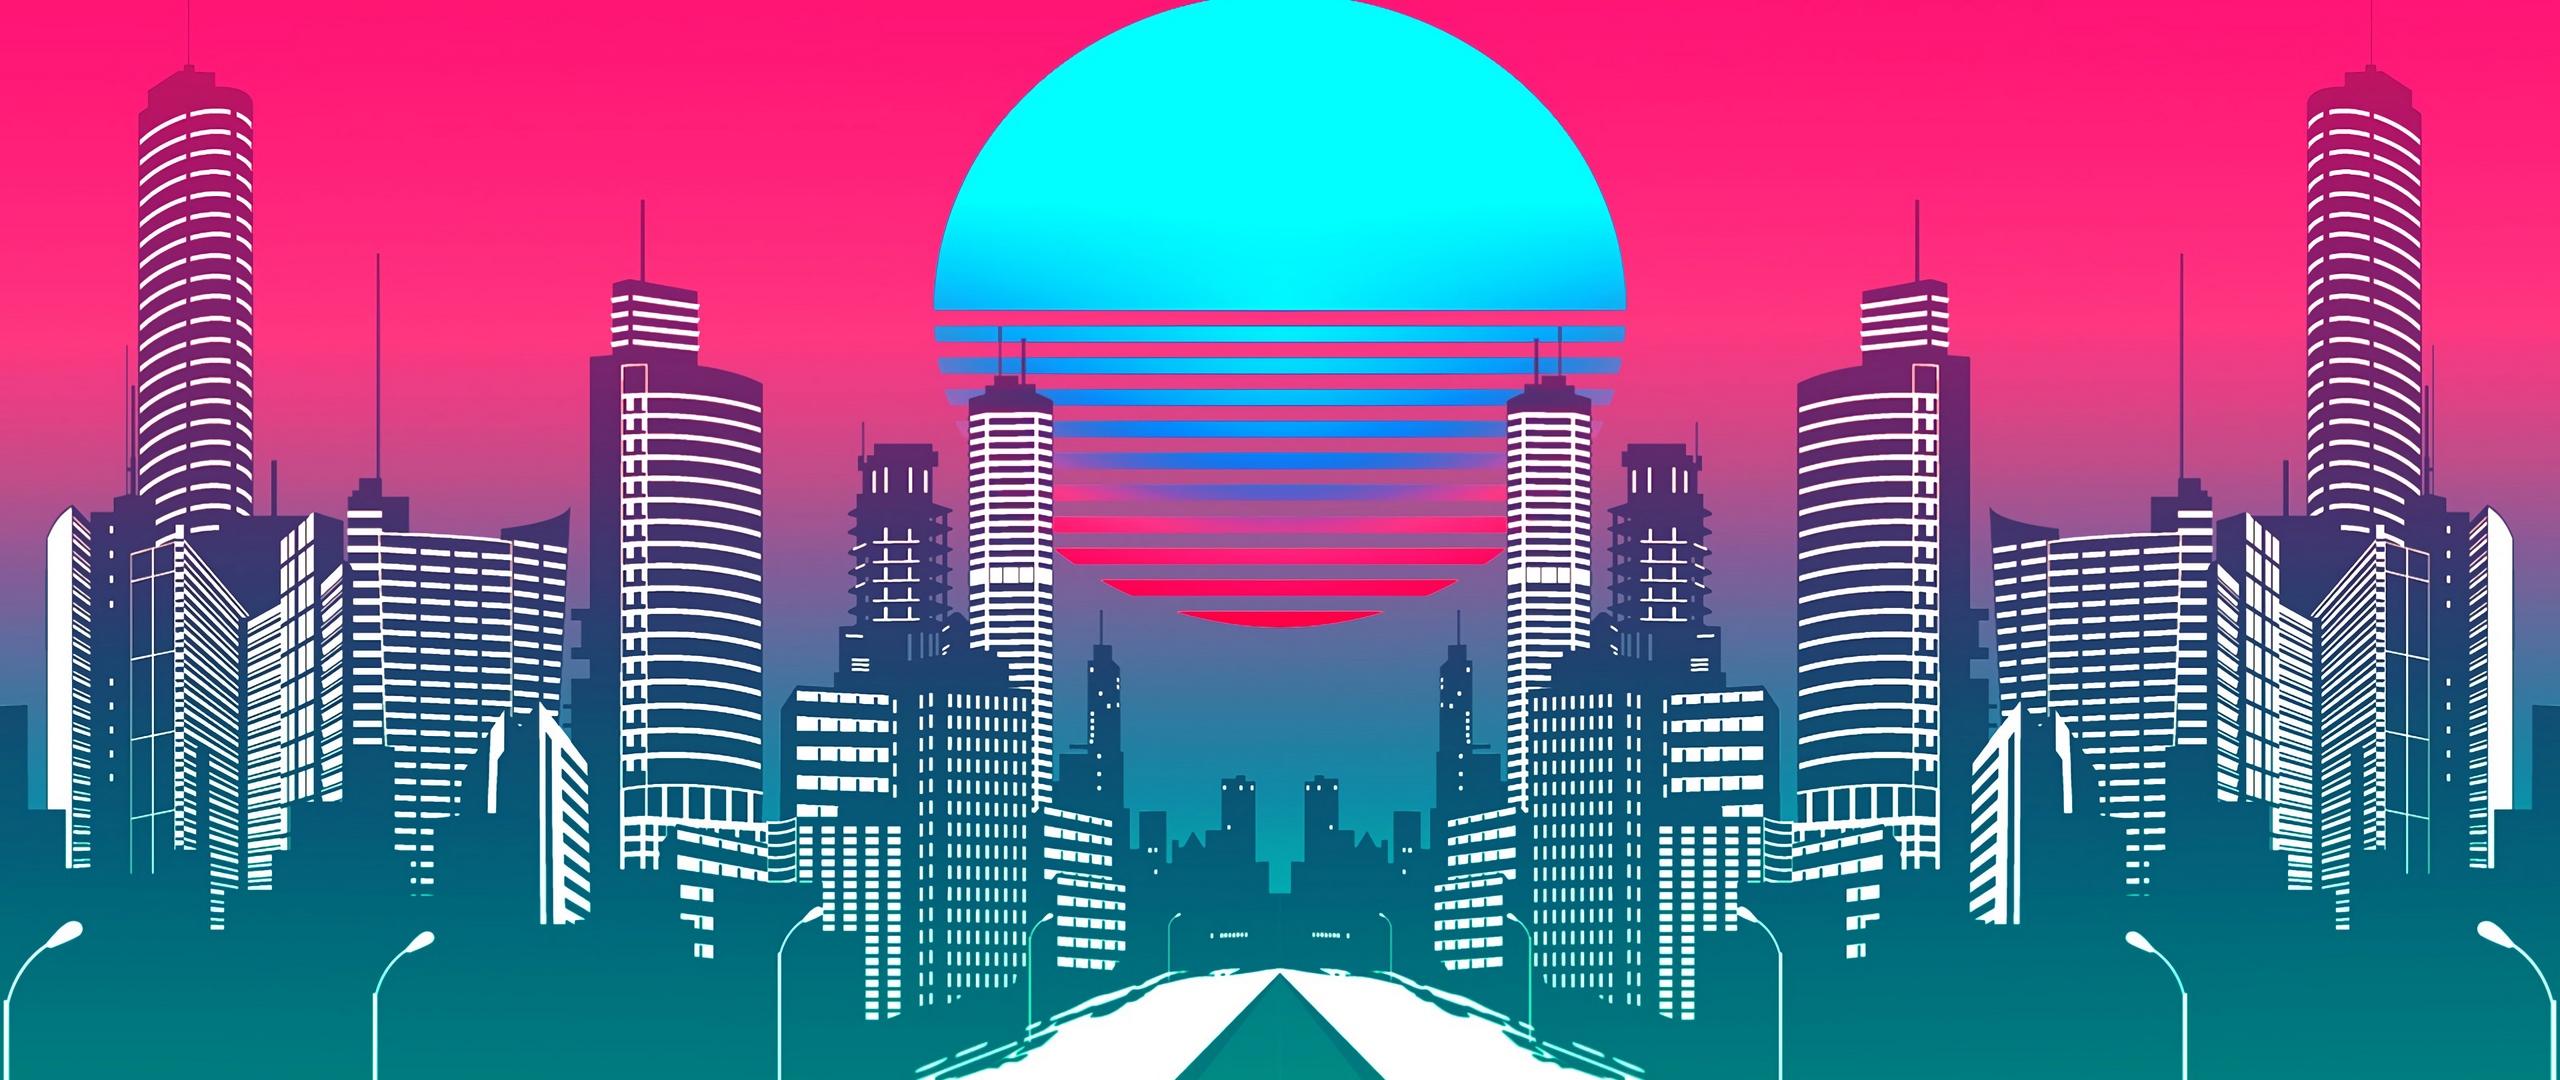 Download wallpaper 2560x1080 city, art, retrowave, synthwave, retro dual wide 1080p HD background